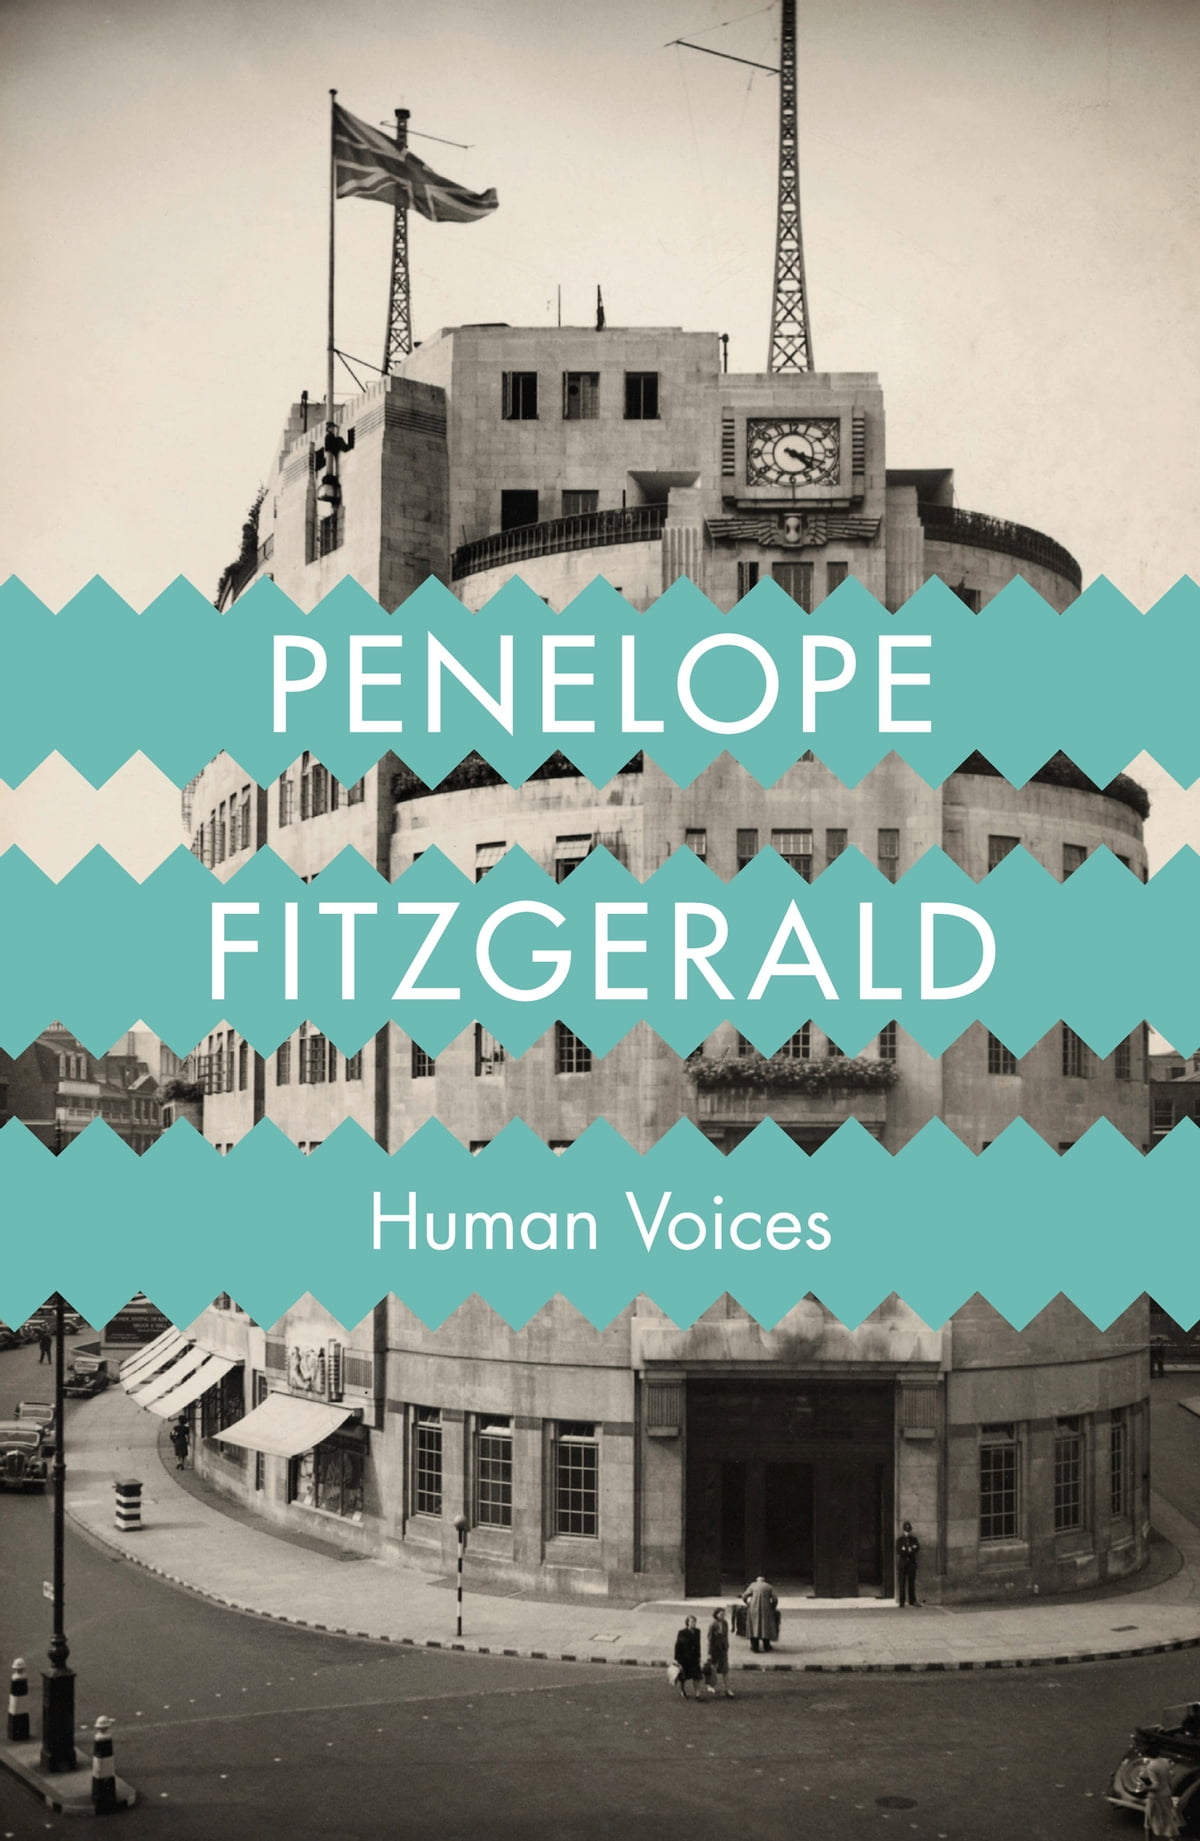 Penelope Fitzgerald: Human Voices (2013, HarperCollins Publishers Limited)